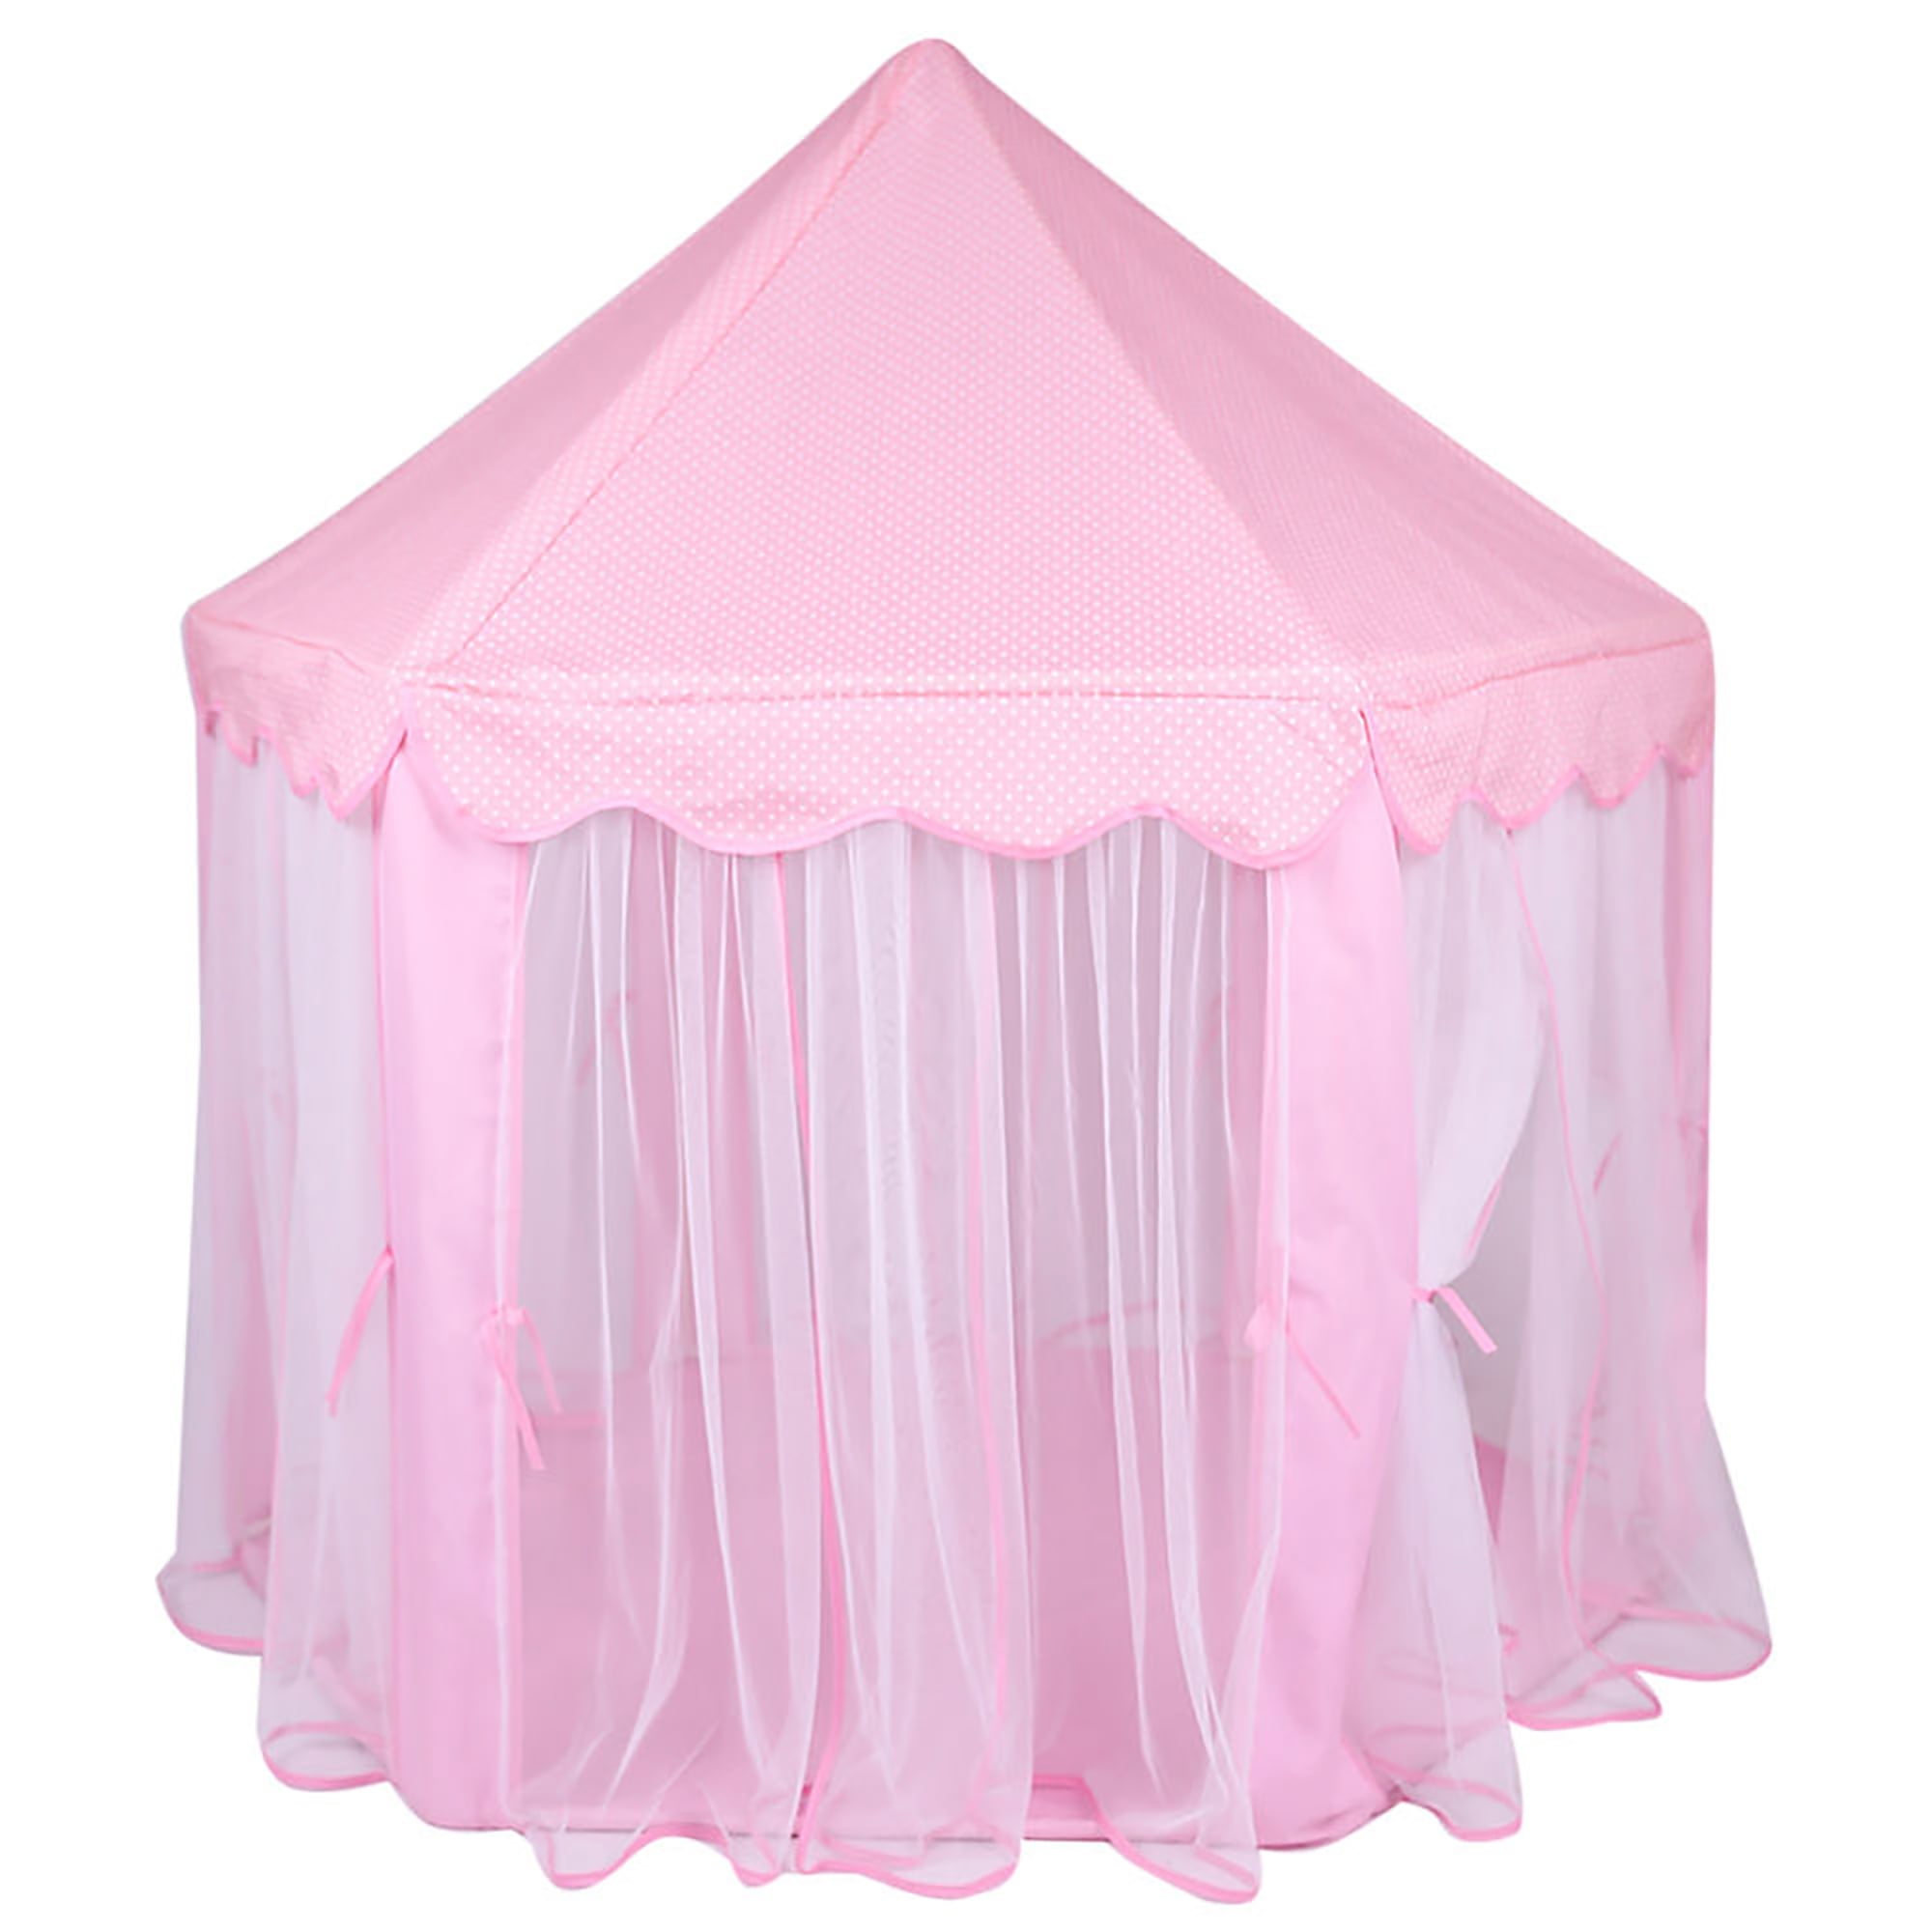 Princess Castle Play Tent Large Indoor/Outdoor Kids Girls Pink Toy w/ Star Light 